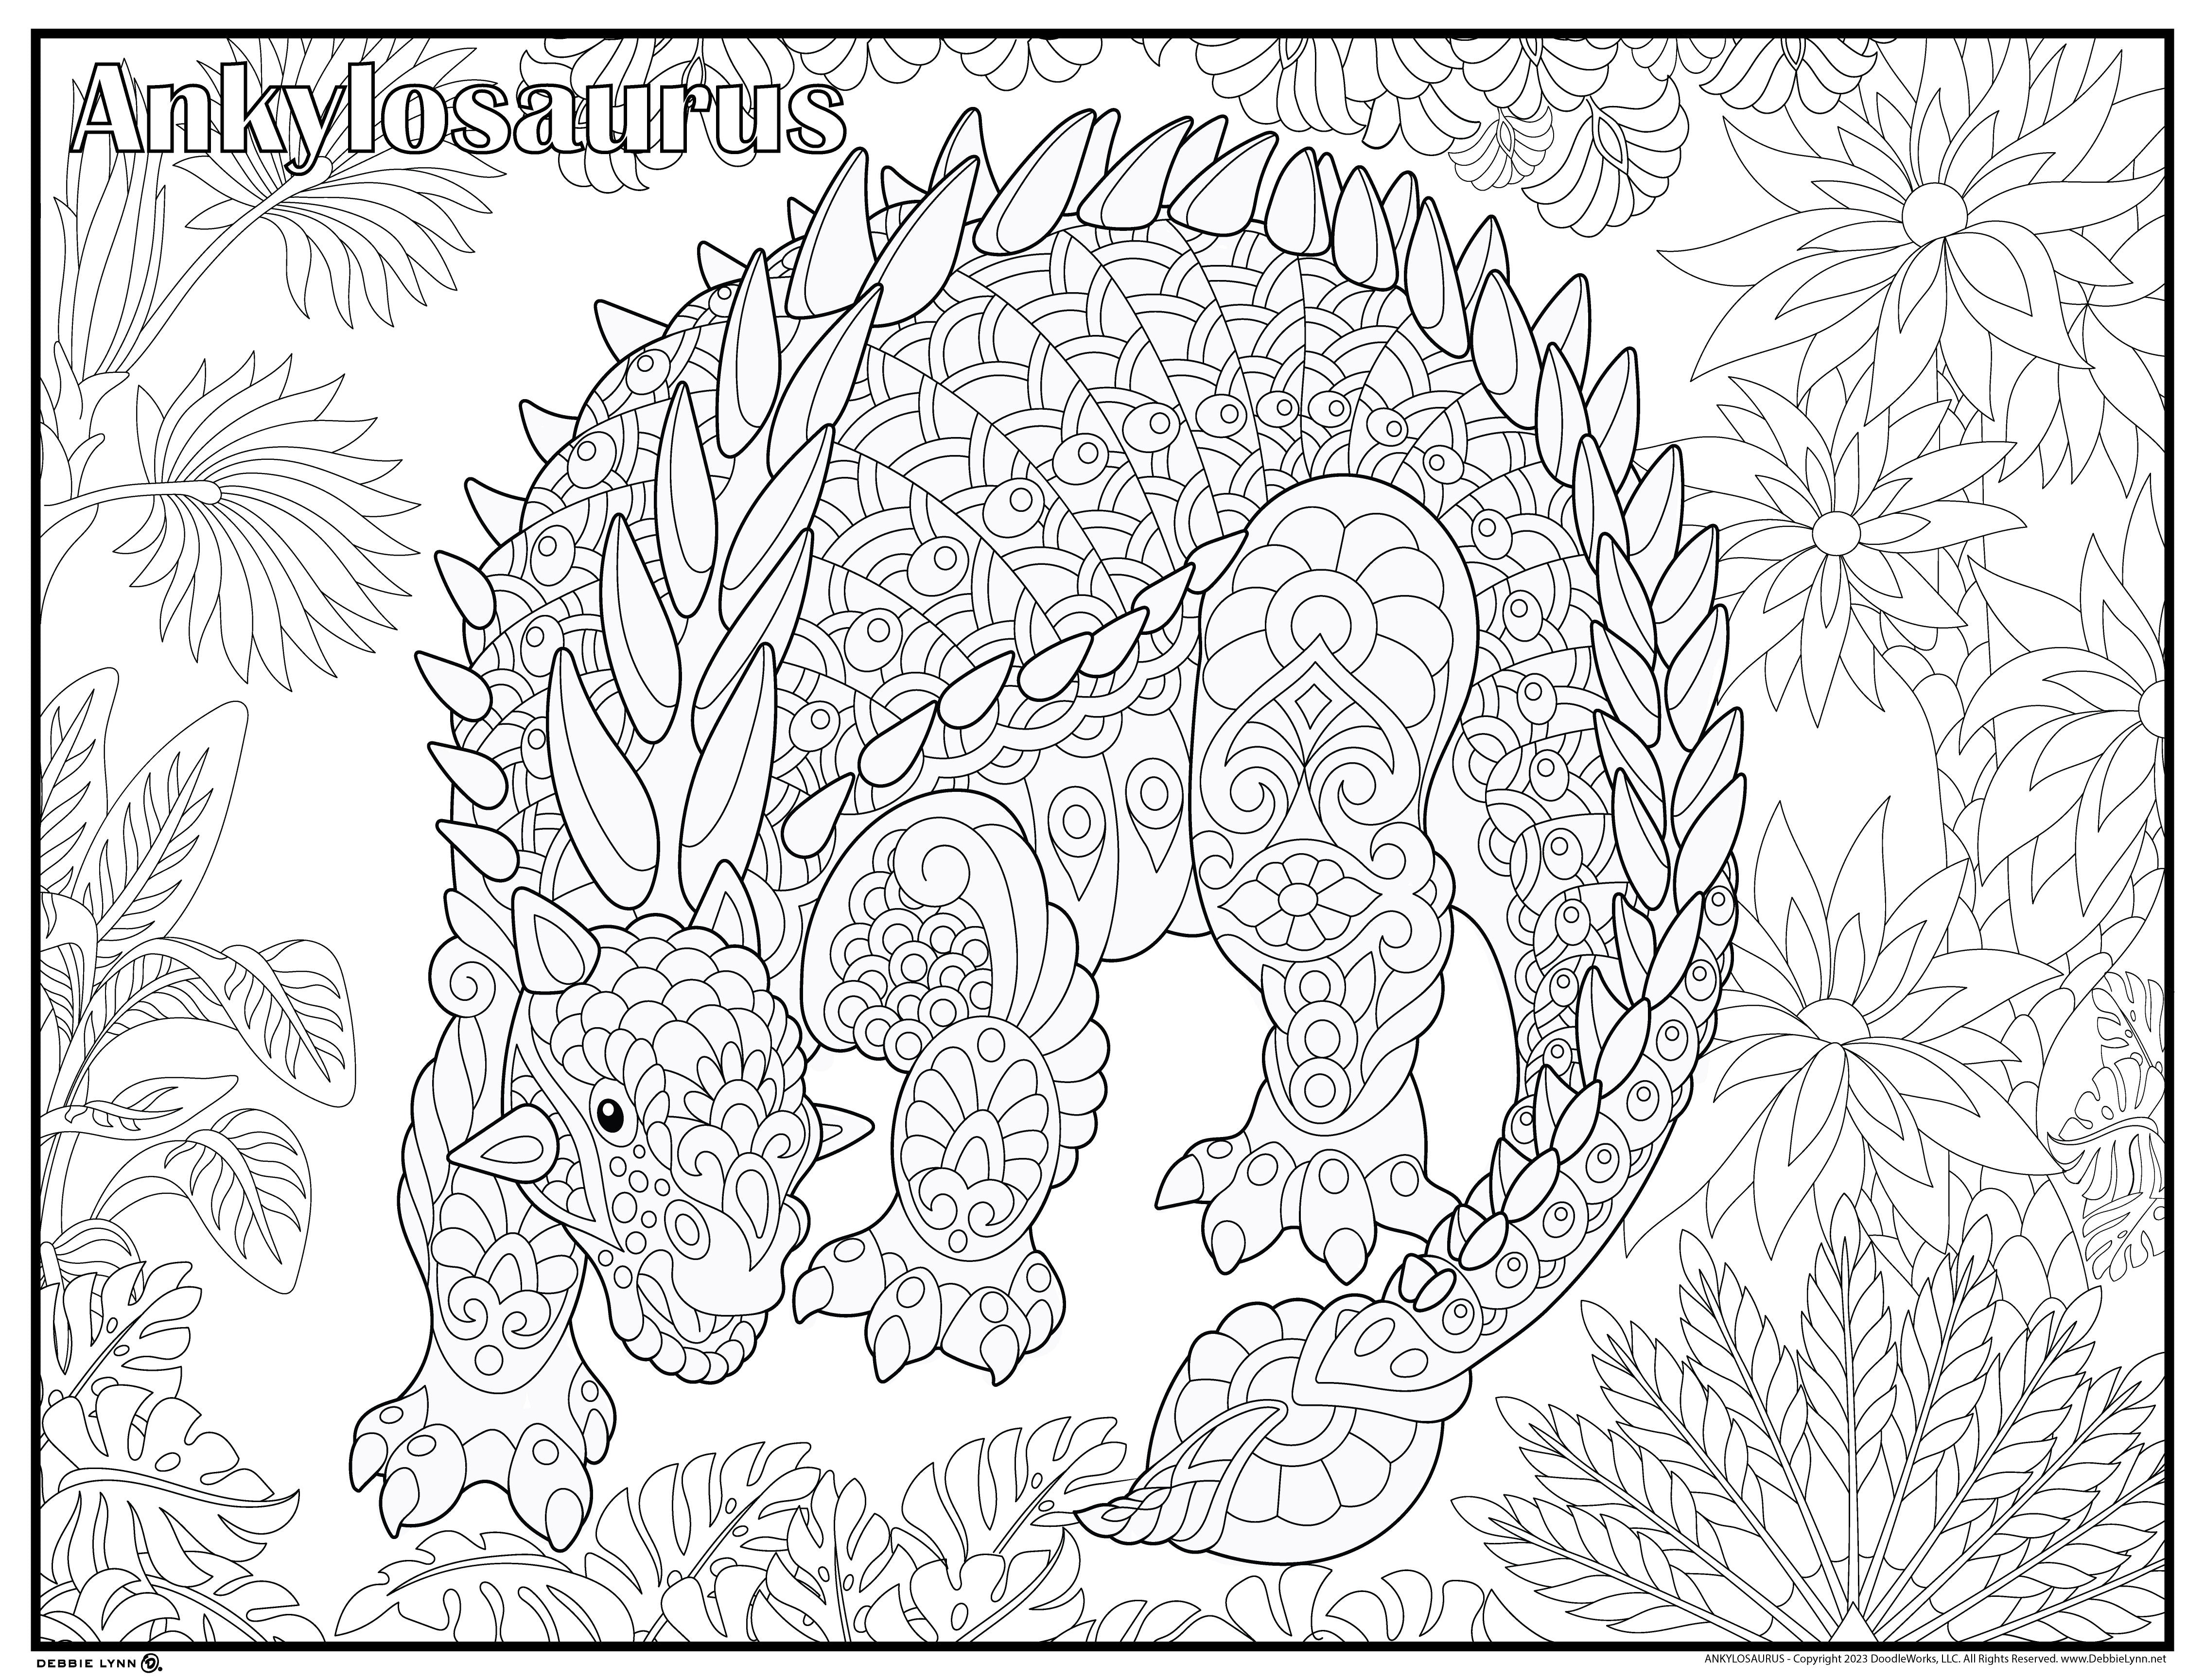 Dino Giant Coloring Poster – Pink Chicken